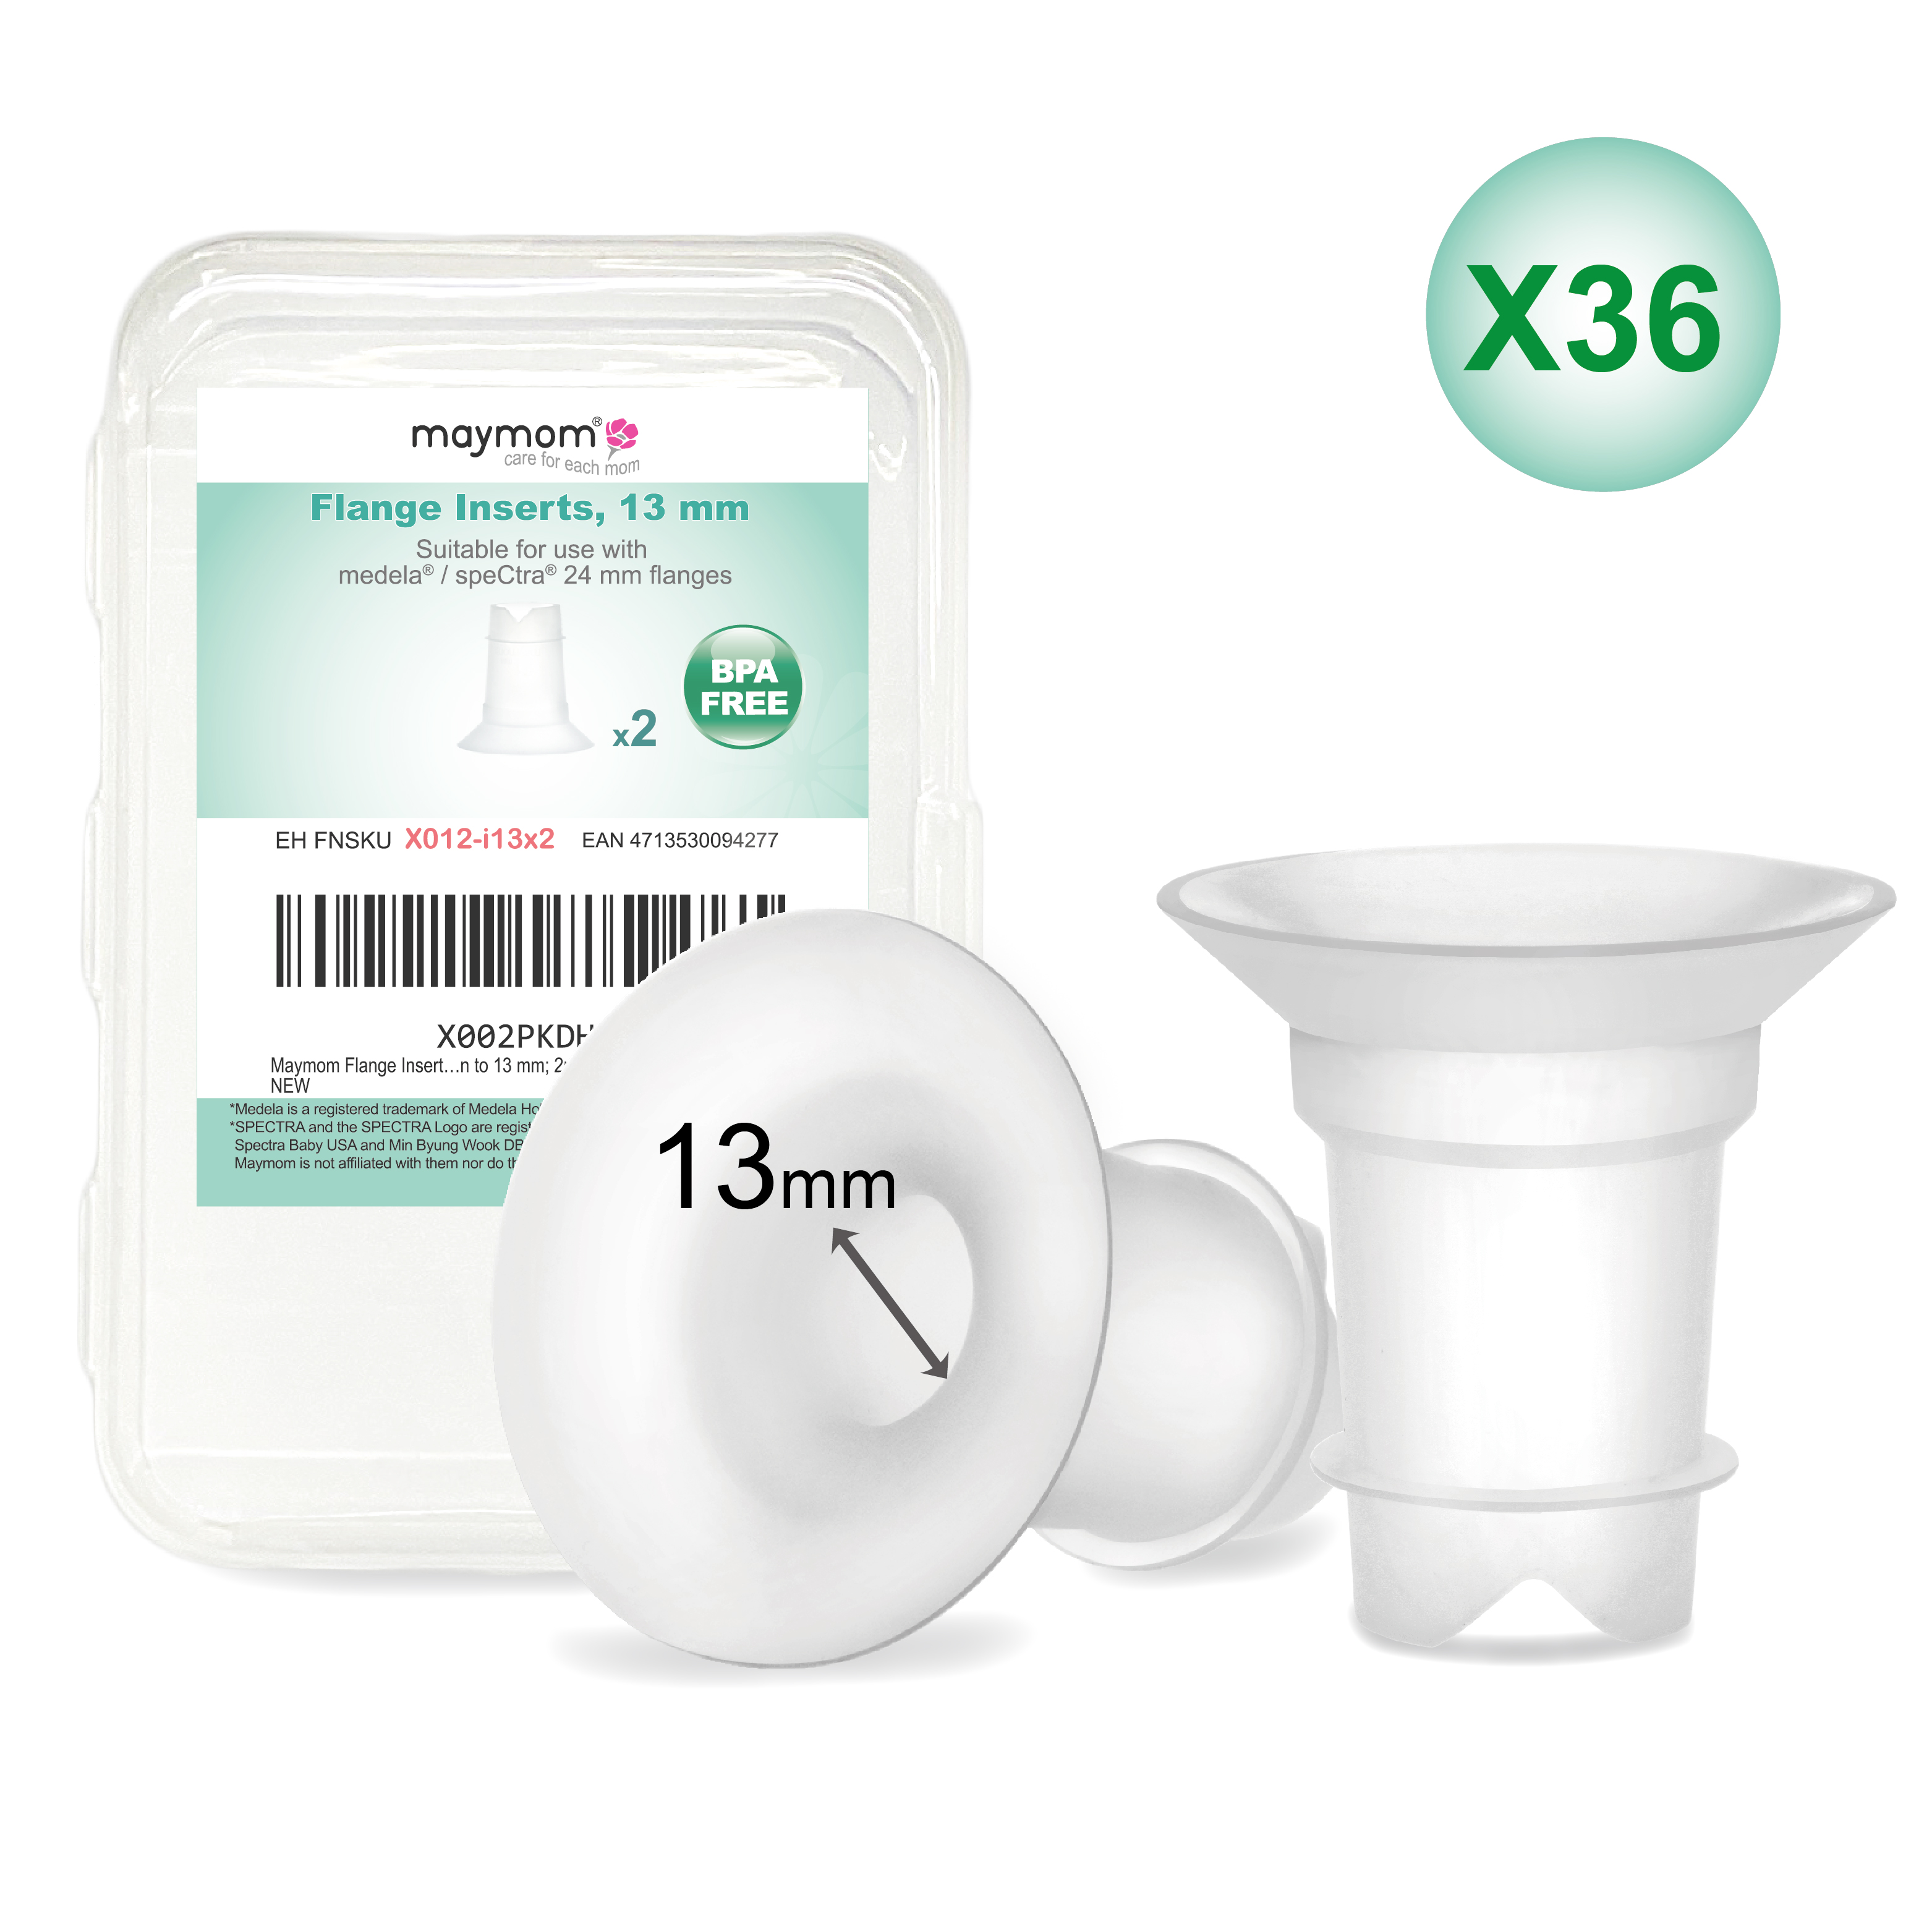 Maymom Flange 13mm Inserts Compatible with Medela, Spectra 24 mm Shields/Flanges, Momcozy/Willow Wearable Cup. - Click Image to Close